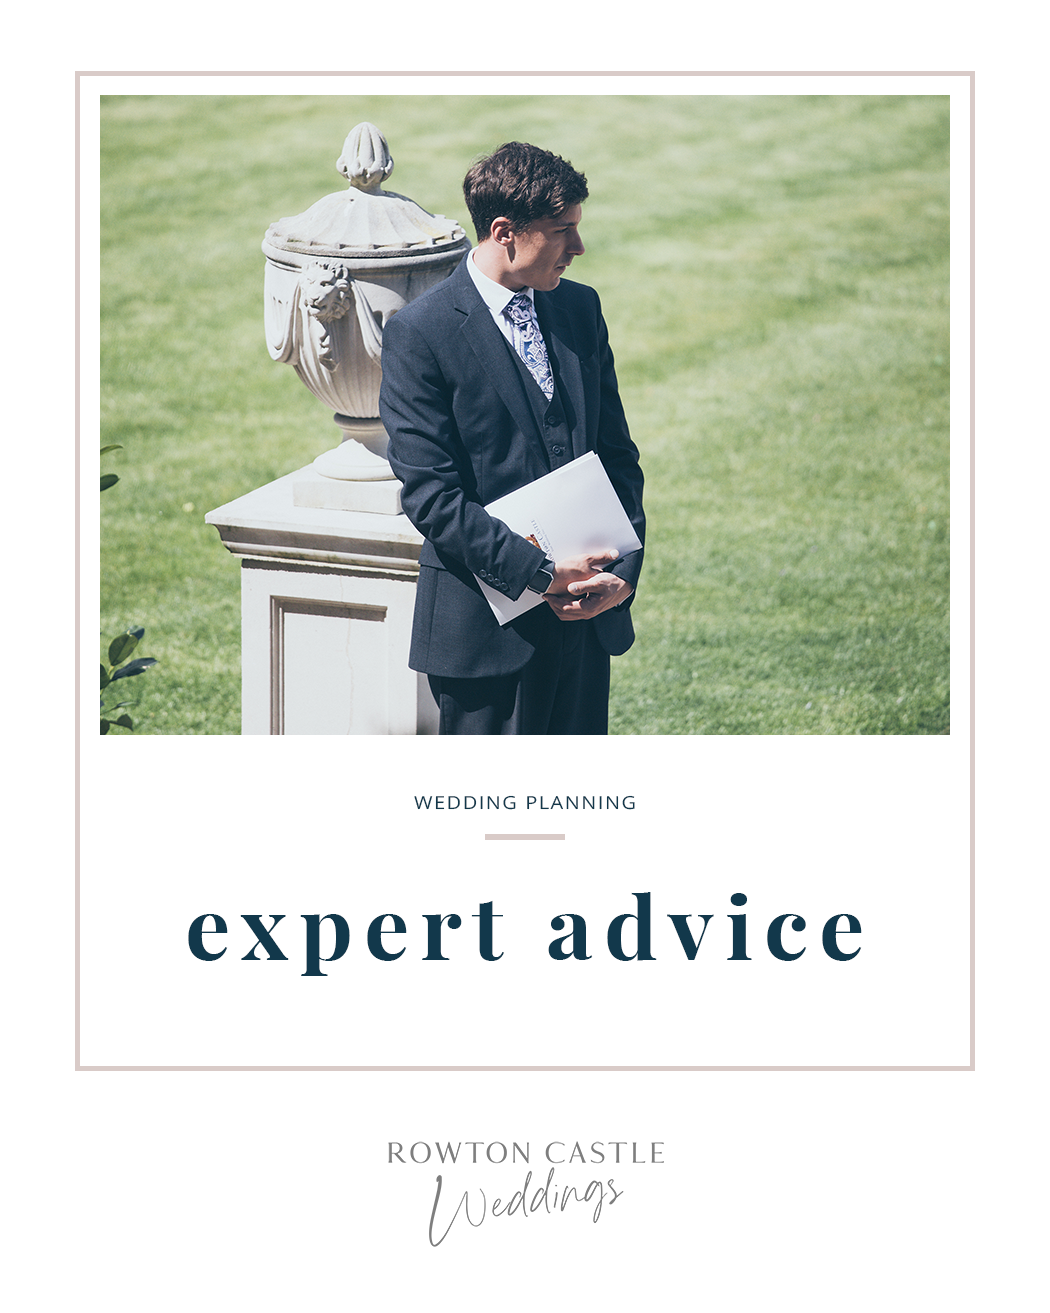 16 Pieces of Wedding Planning Advice - From the Experts - Blog | Rowton Castle